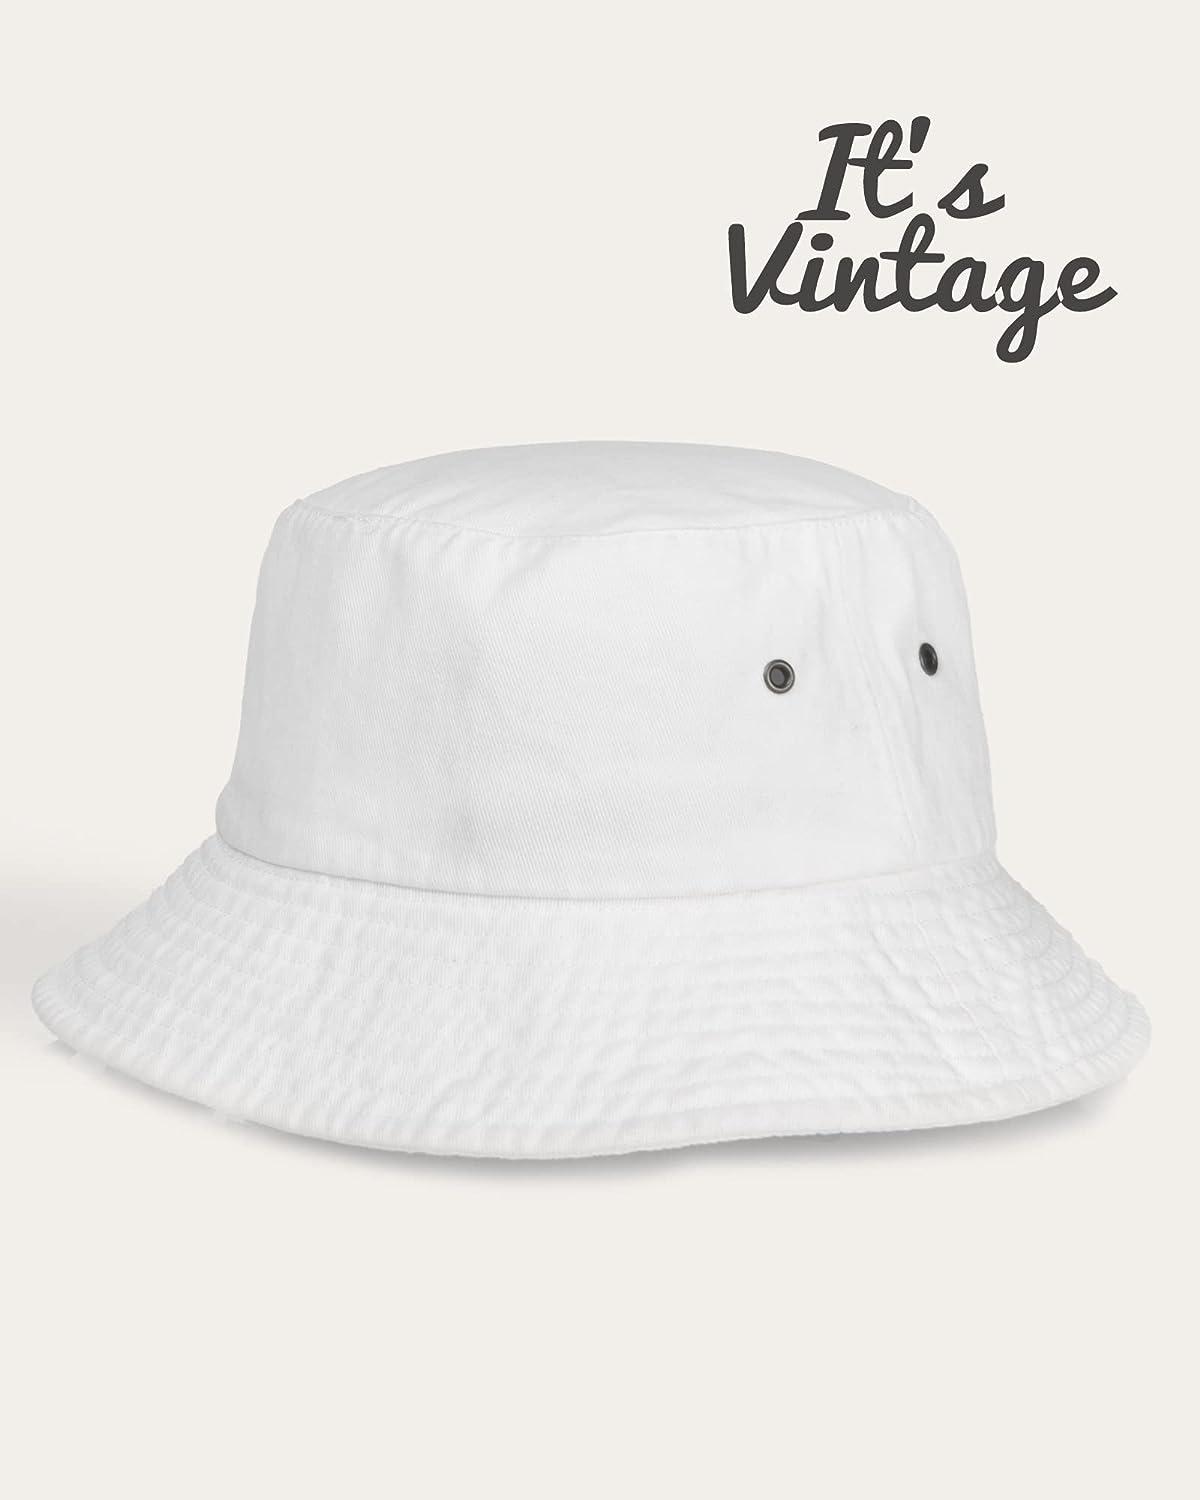 Bucket Hat for Women Men Canvas Washed Cotton Trendy Distressed Womens  Summer Beach Sun Hats with Detachable Strings 01-hot Color Recommend White  Medium-Large